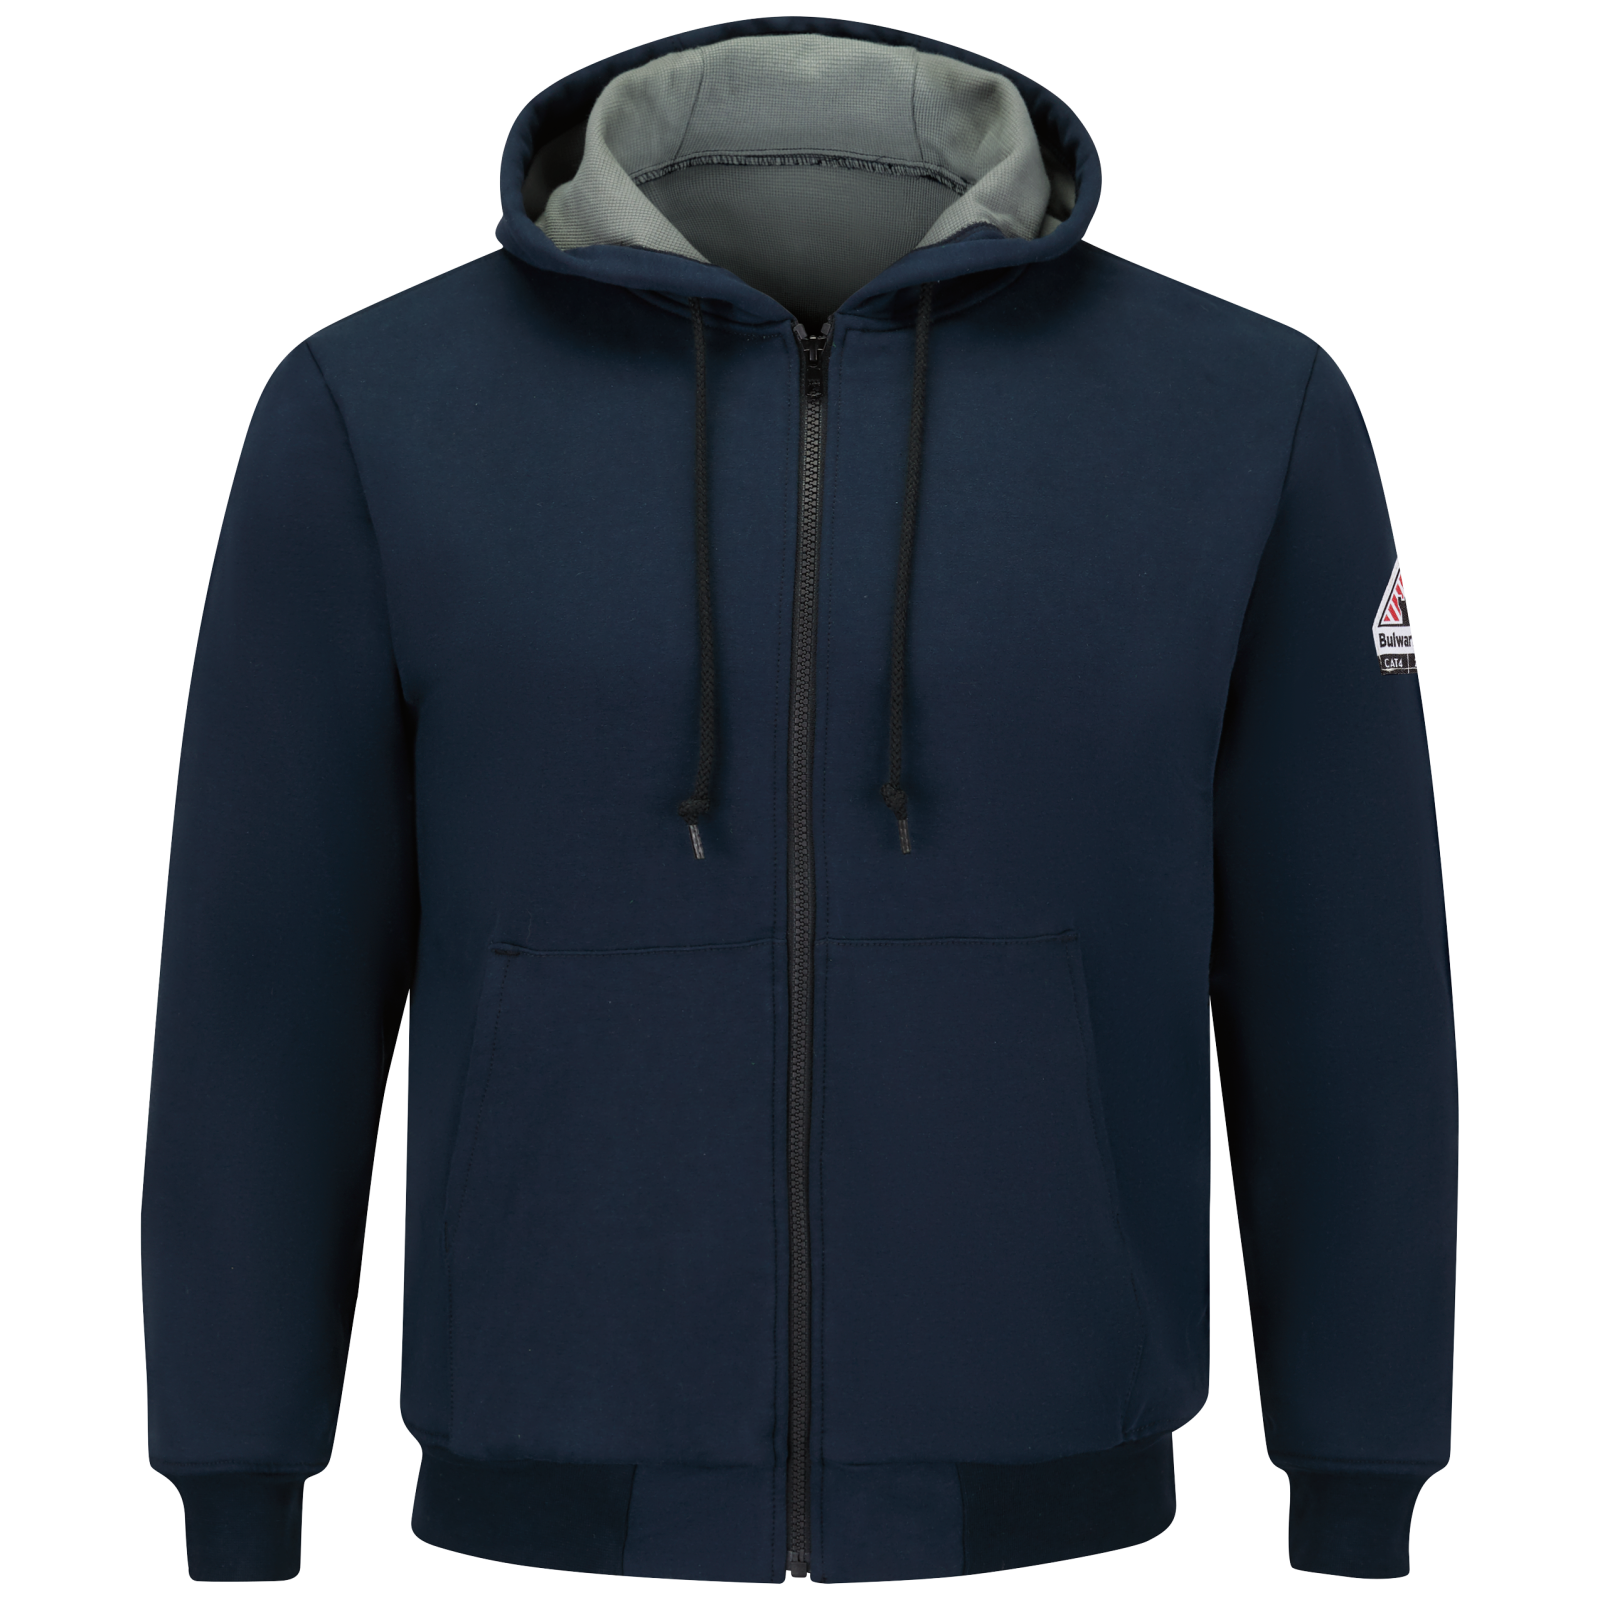 Lightweight Zip Up Hoodie For Sale - All American Clothing Co